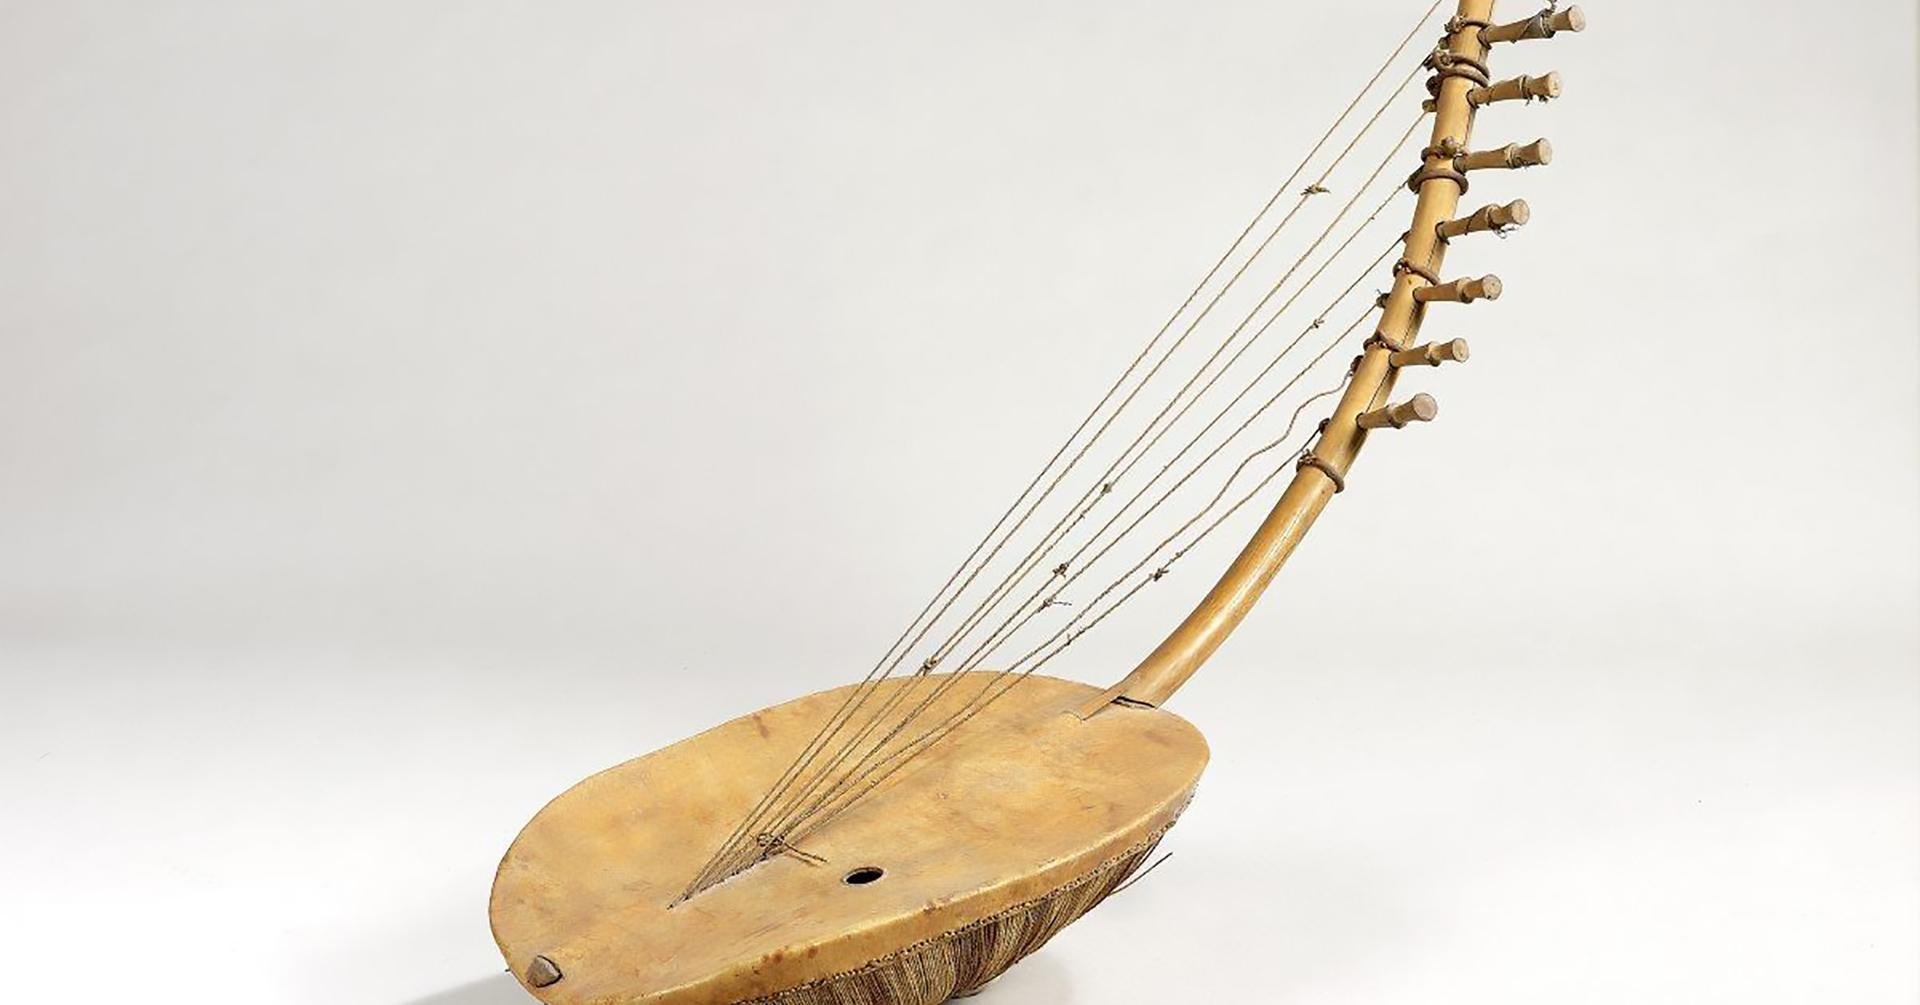 an ennanga, which is a wooden southeast asian harp with a curved neck and bowl-shaped resonator